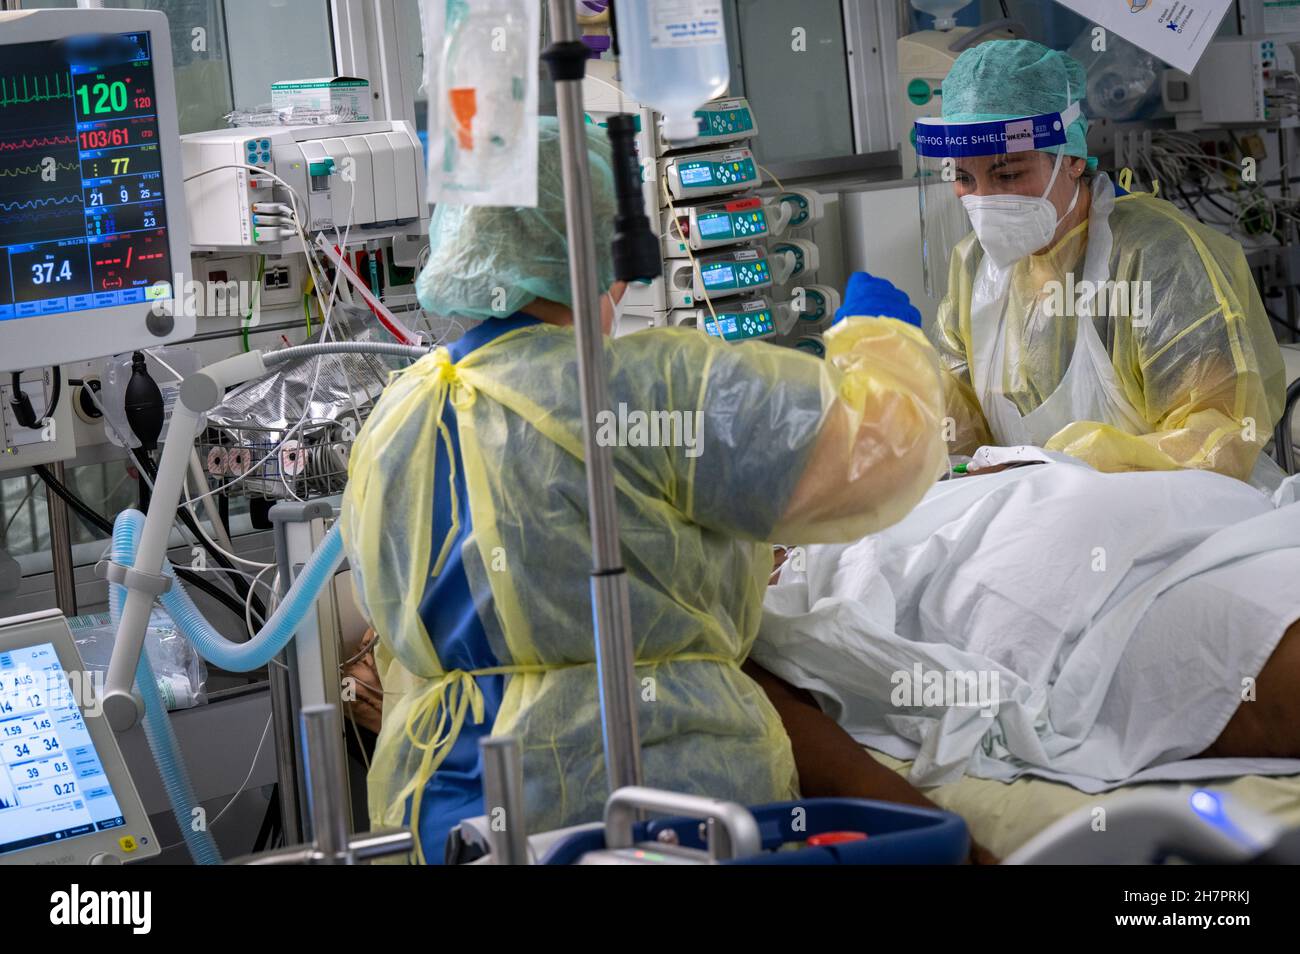 Munich, Germany. 24th Nov, 2021. A patient receives medical care from specialists in the Covid 19 intensive care unit at the 'Rechts der Isar' hospital. Credit: Peter Kneffel/dpa - ATTENTION: Person(s) have been pixelated for legal reasons/dpa/Alamy Live News Stock Photo